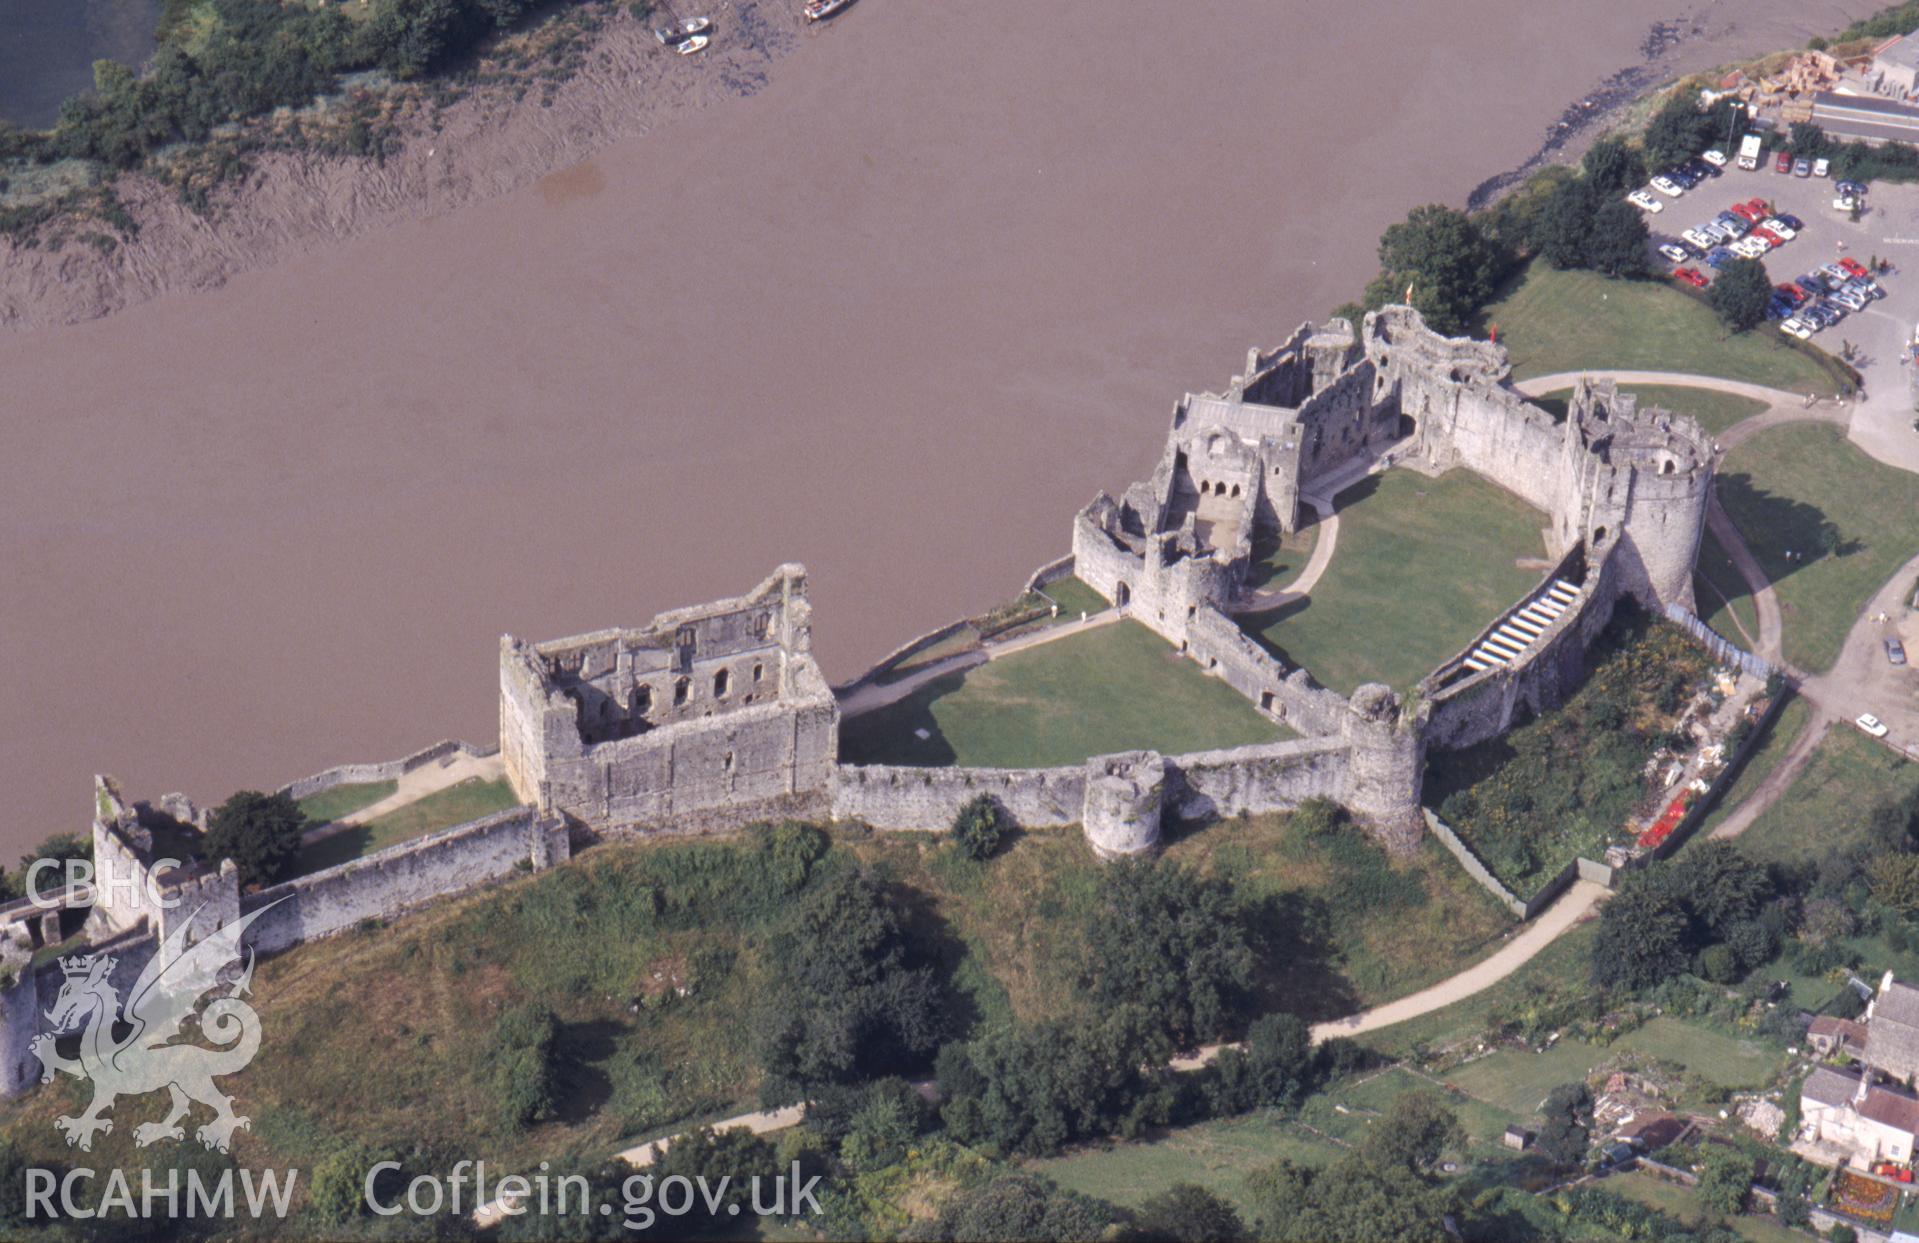 Slide of RCAHMW colour oblique aerial photograph of Chepstow Castle, taken by C.R. Musson, 5/8/1994.